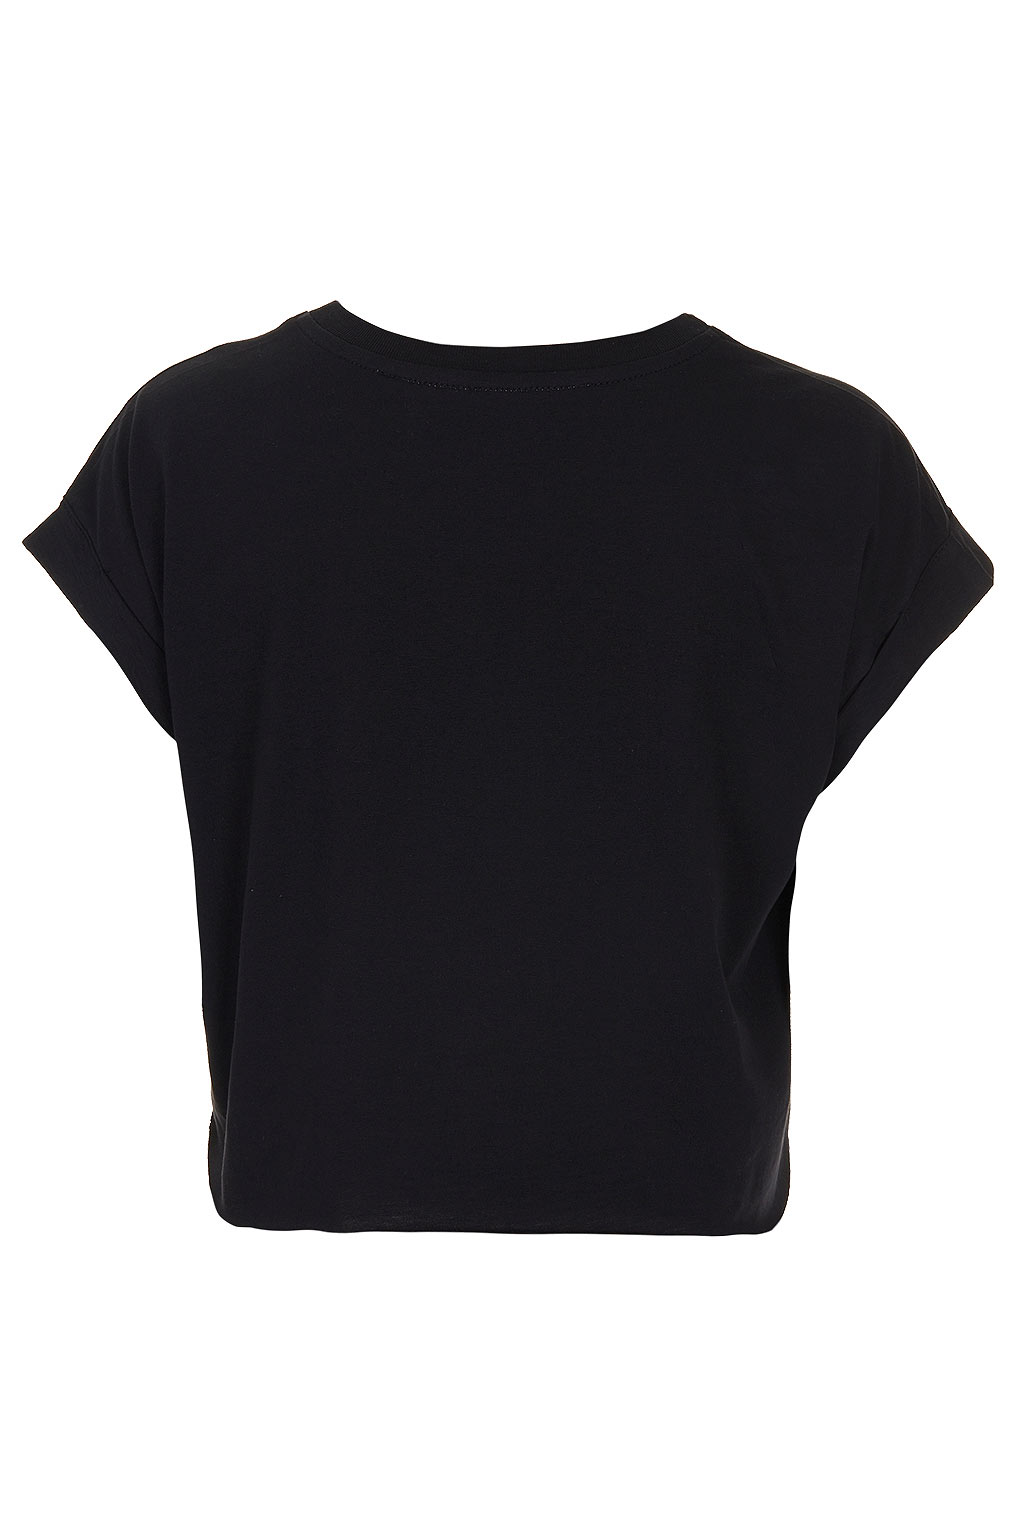 Topshop Tuxedo Crop Tee By Tee and Cake in Black | Lyst